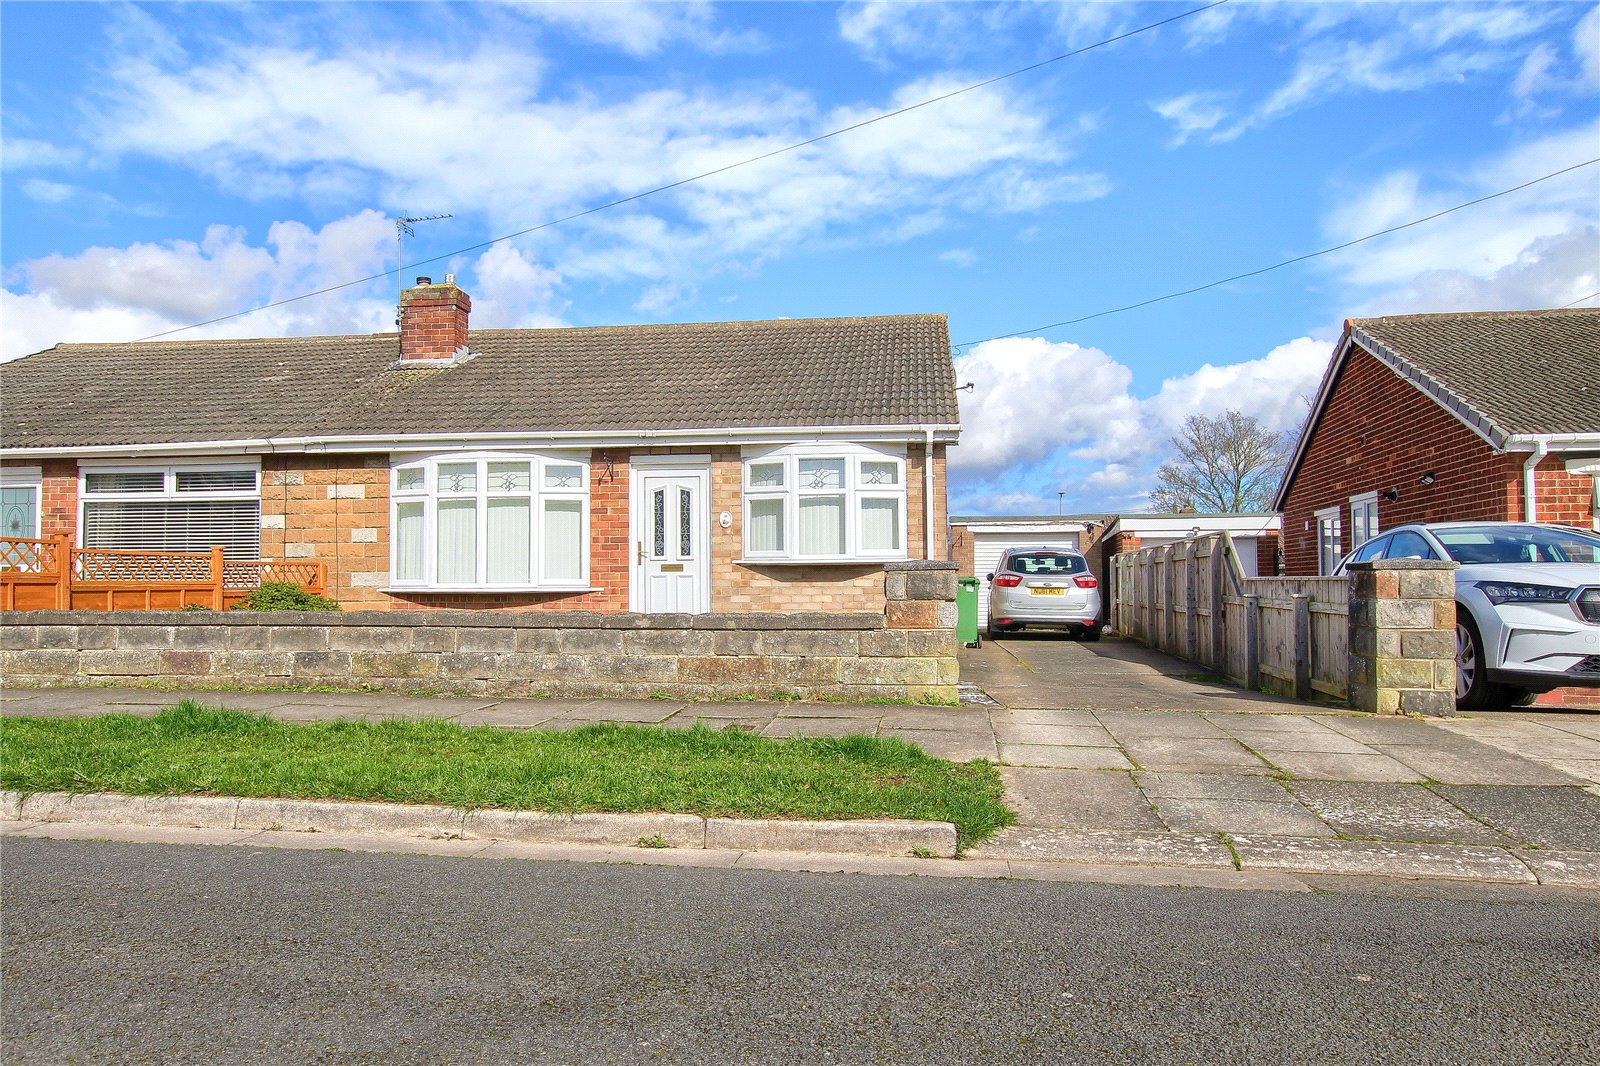 2 bed bungalow for sale in Wolviston Court, Billingham - Property Image 1